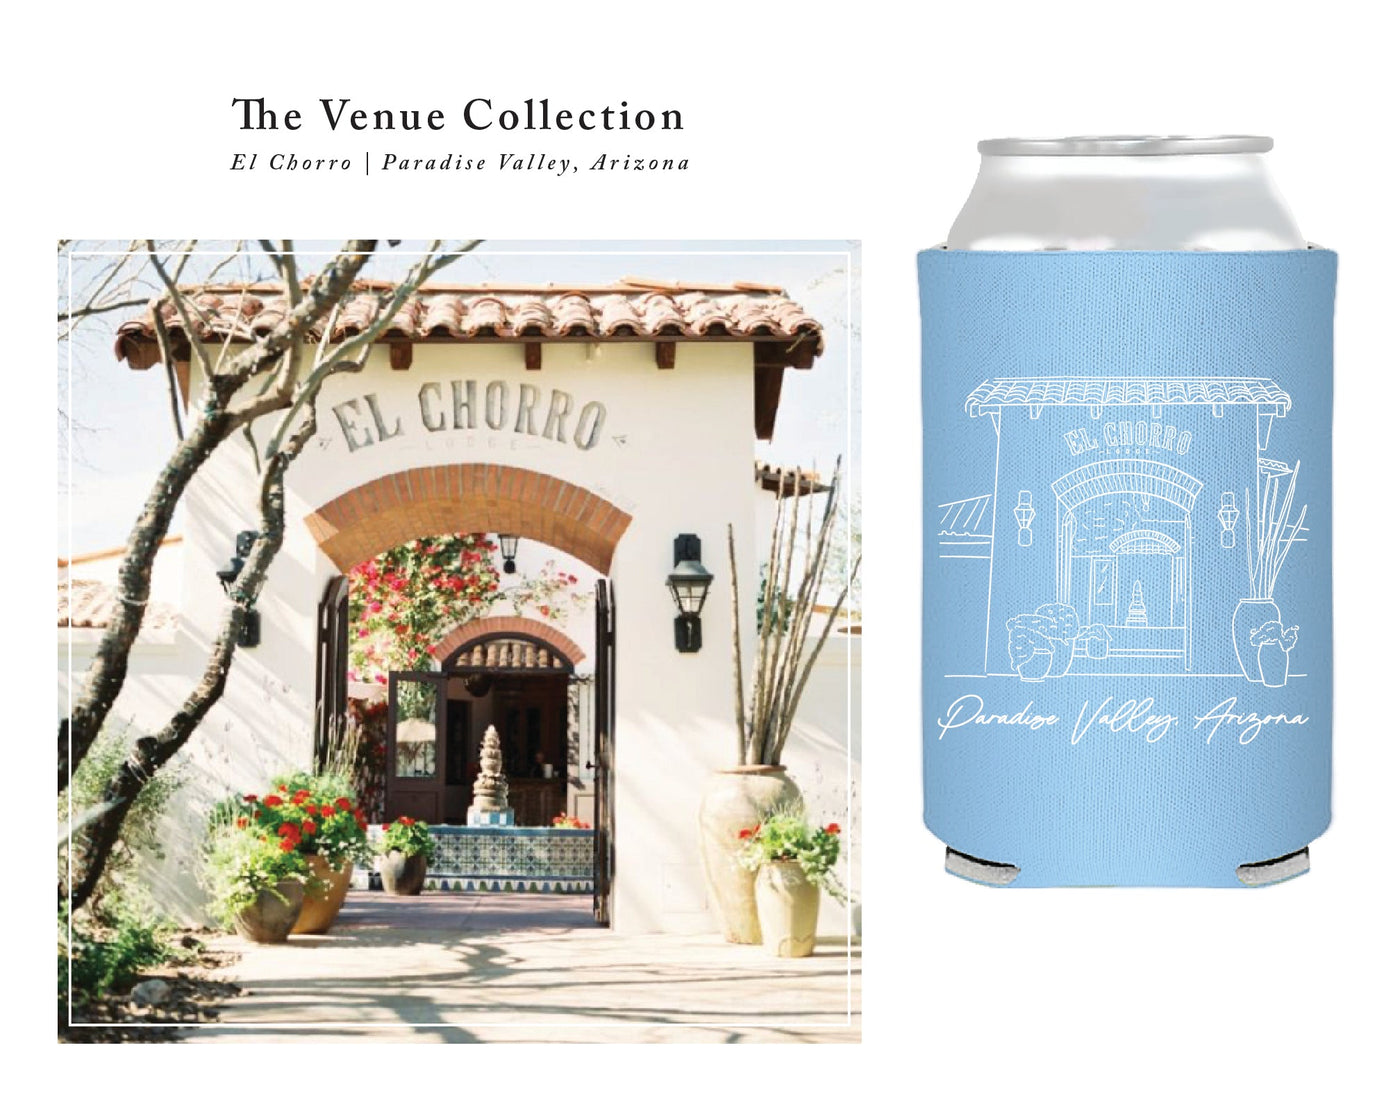 "The Venue Collection" | El Chorro Can Coolers